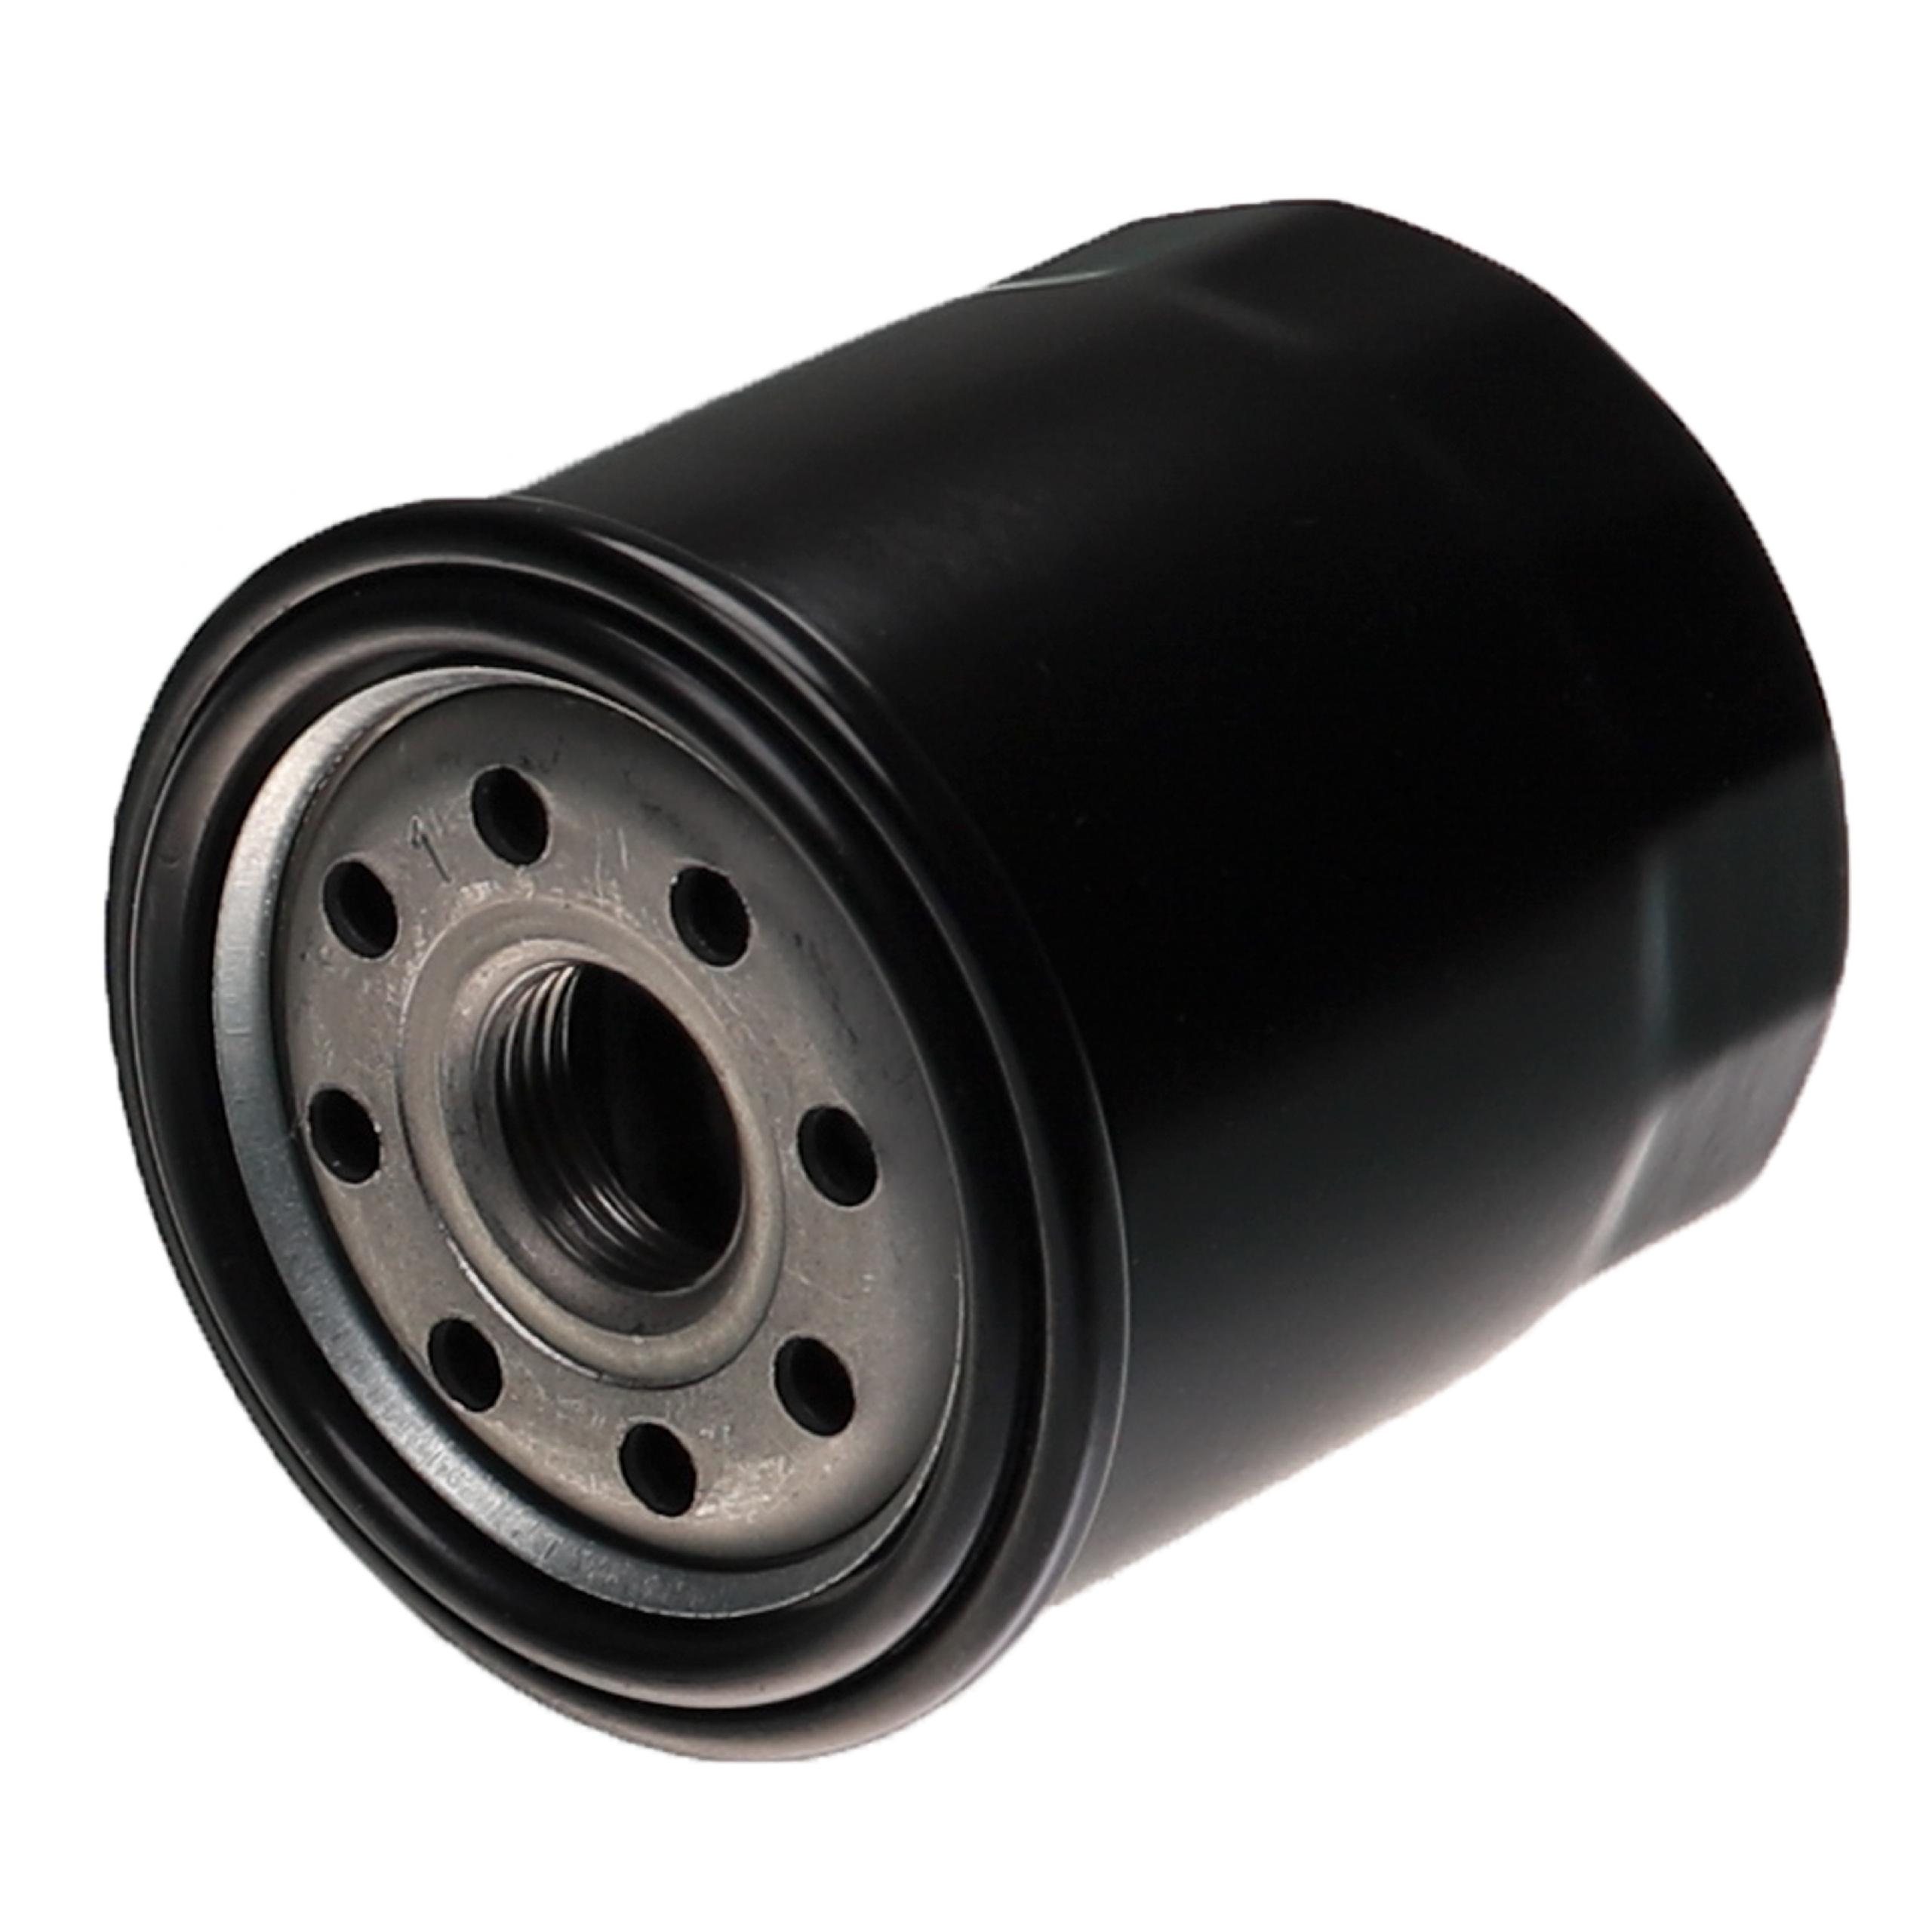 Vehicle Oil Filter as Replacement for ACDelco X161 - Spare Filter